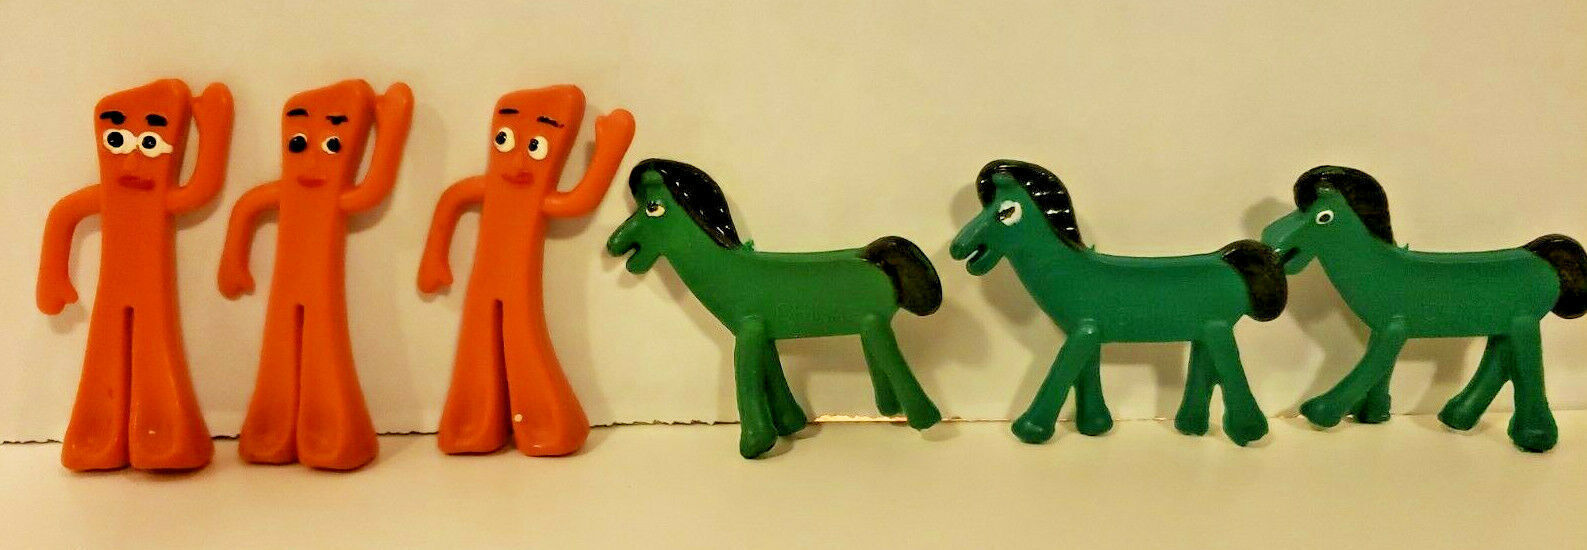 Vinage 6 Gumby & Pokey Charms Old Gumball Vending Machine Toy Prizes NewOldStock